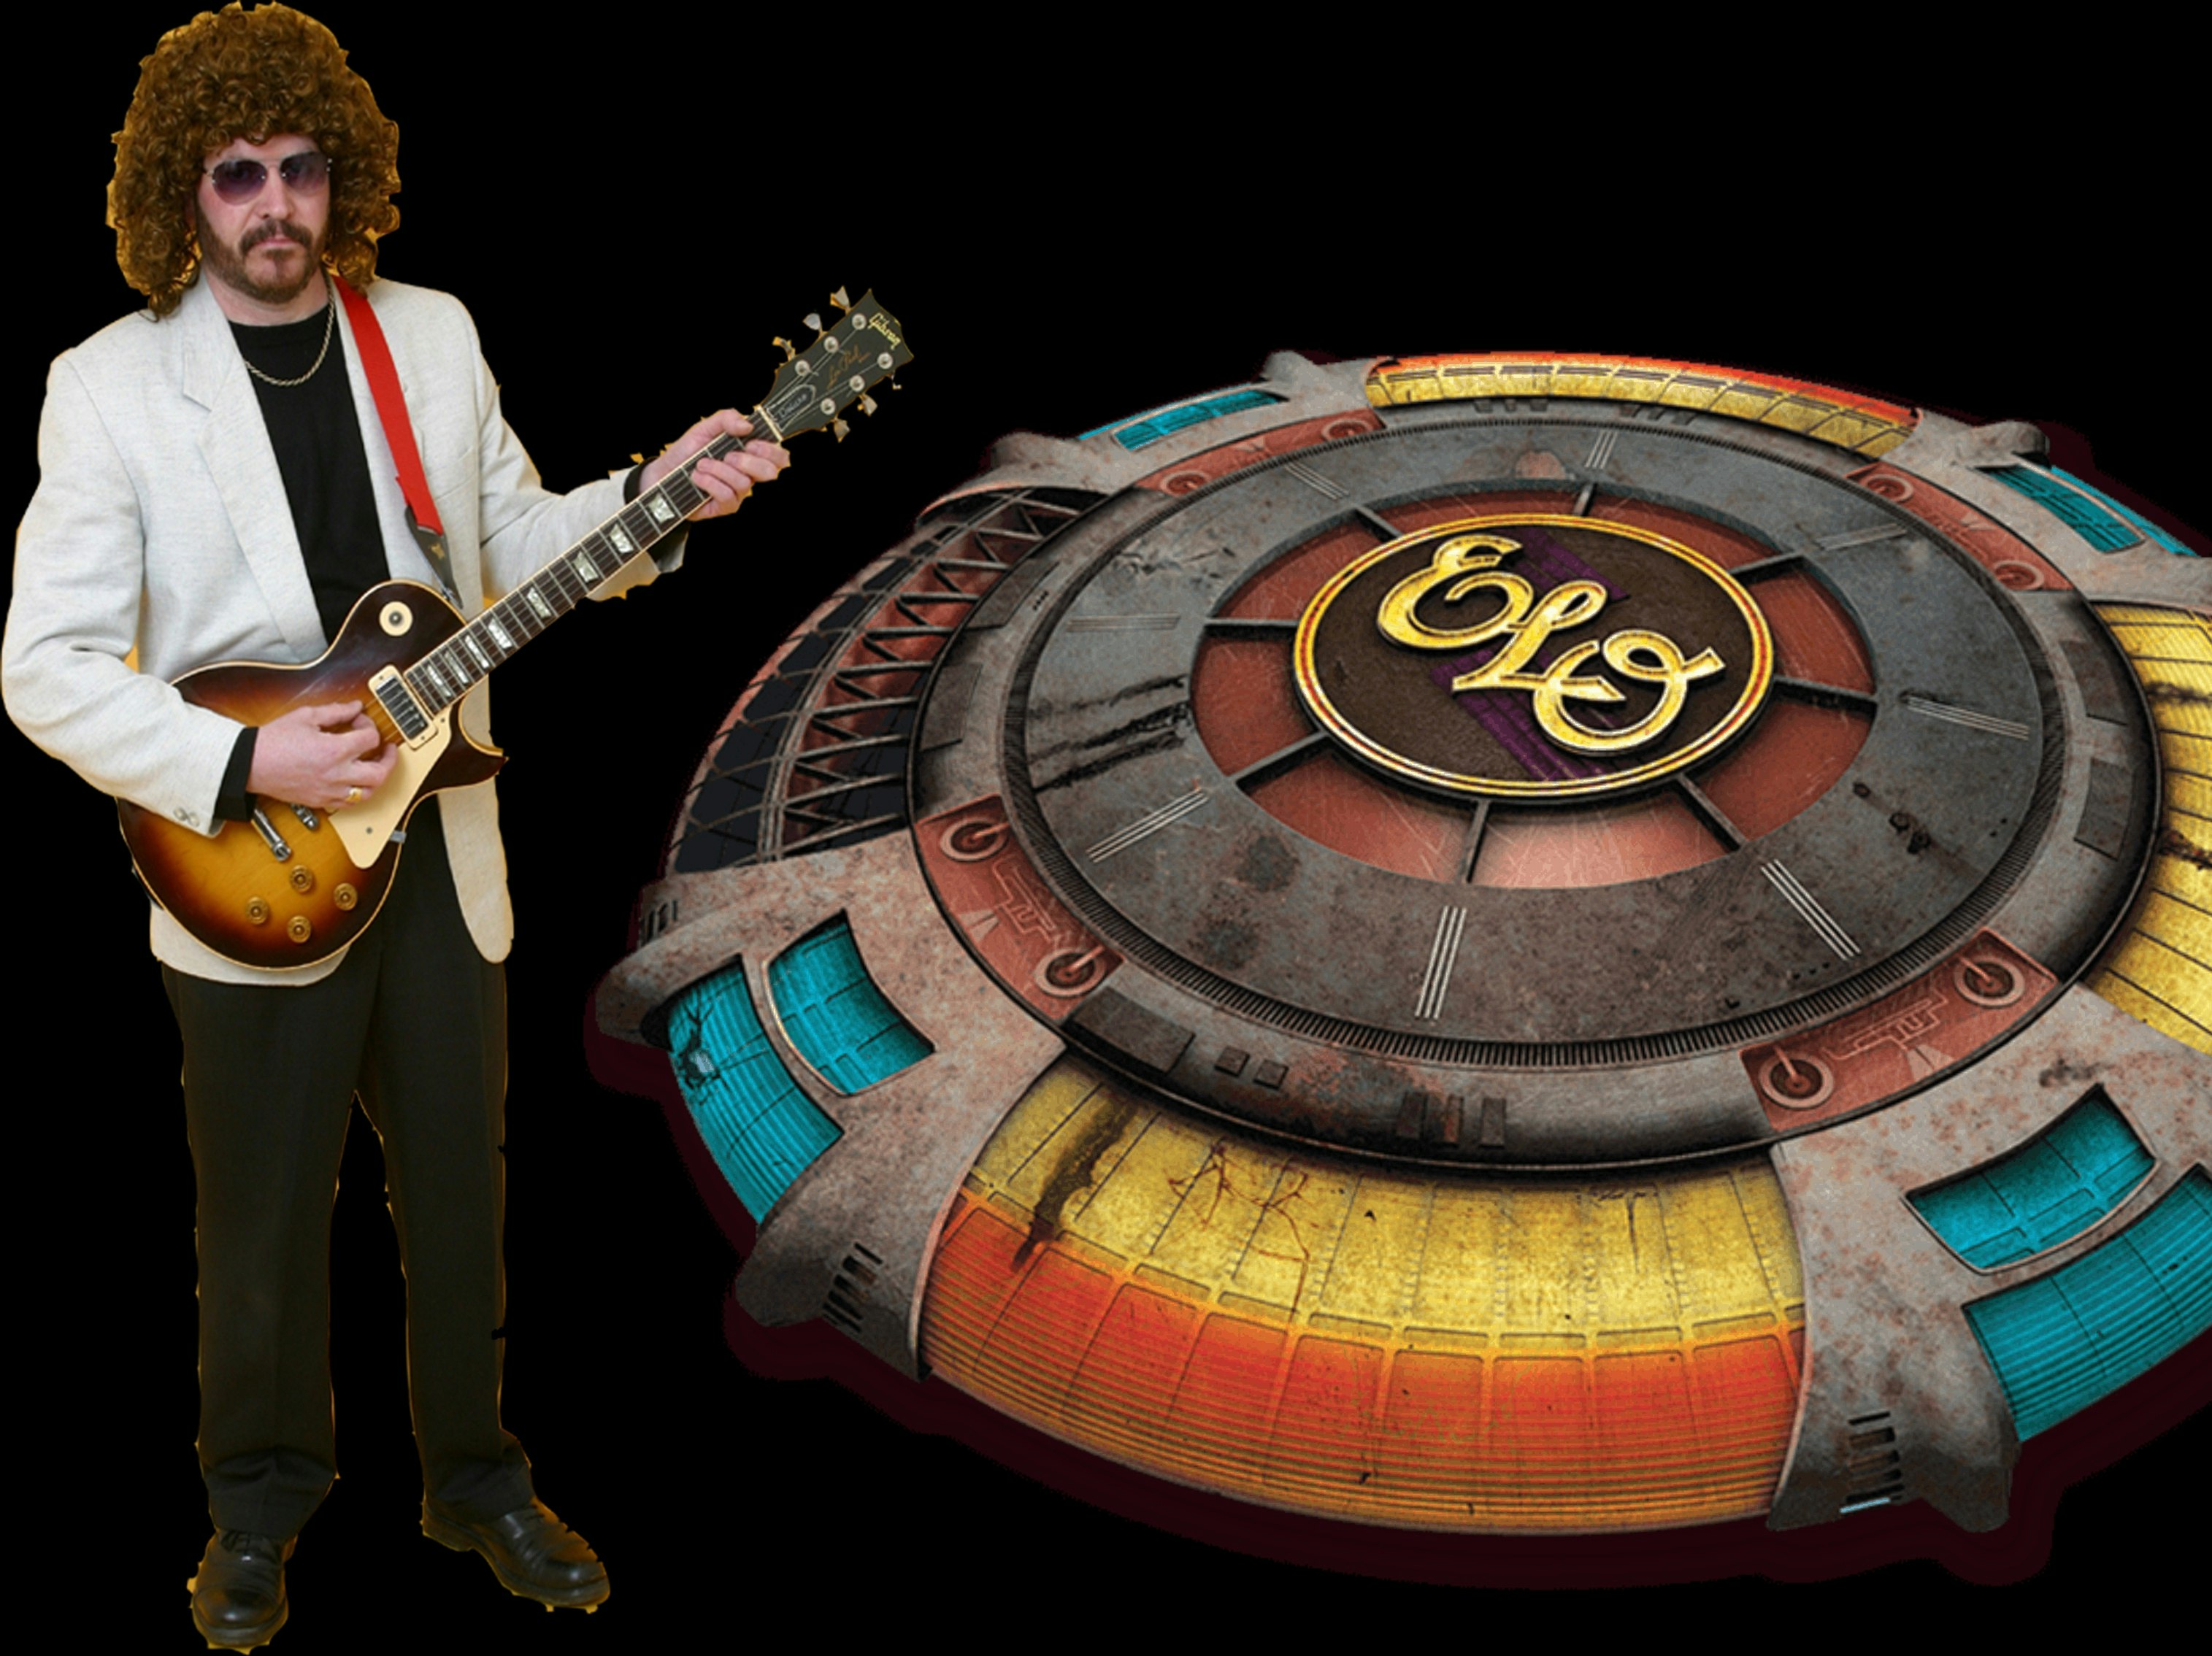 electric light orchestra 2021 tour